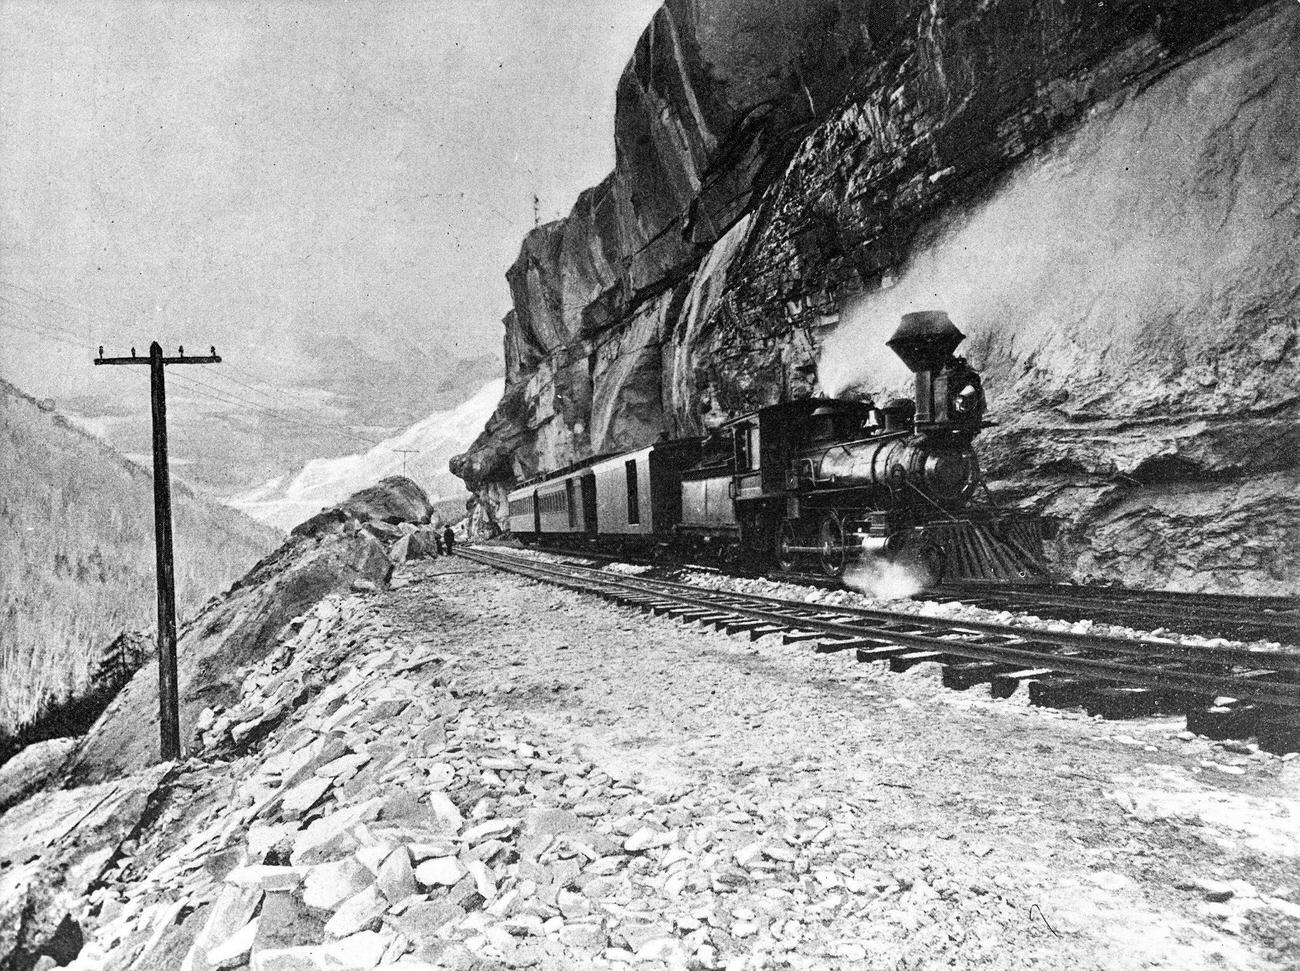 The Railway of the White-Pass en route to the Klondike Gold Mines, 19th century, Paris, France.